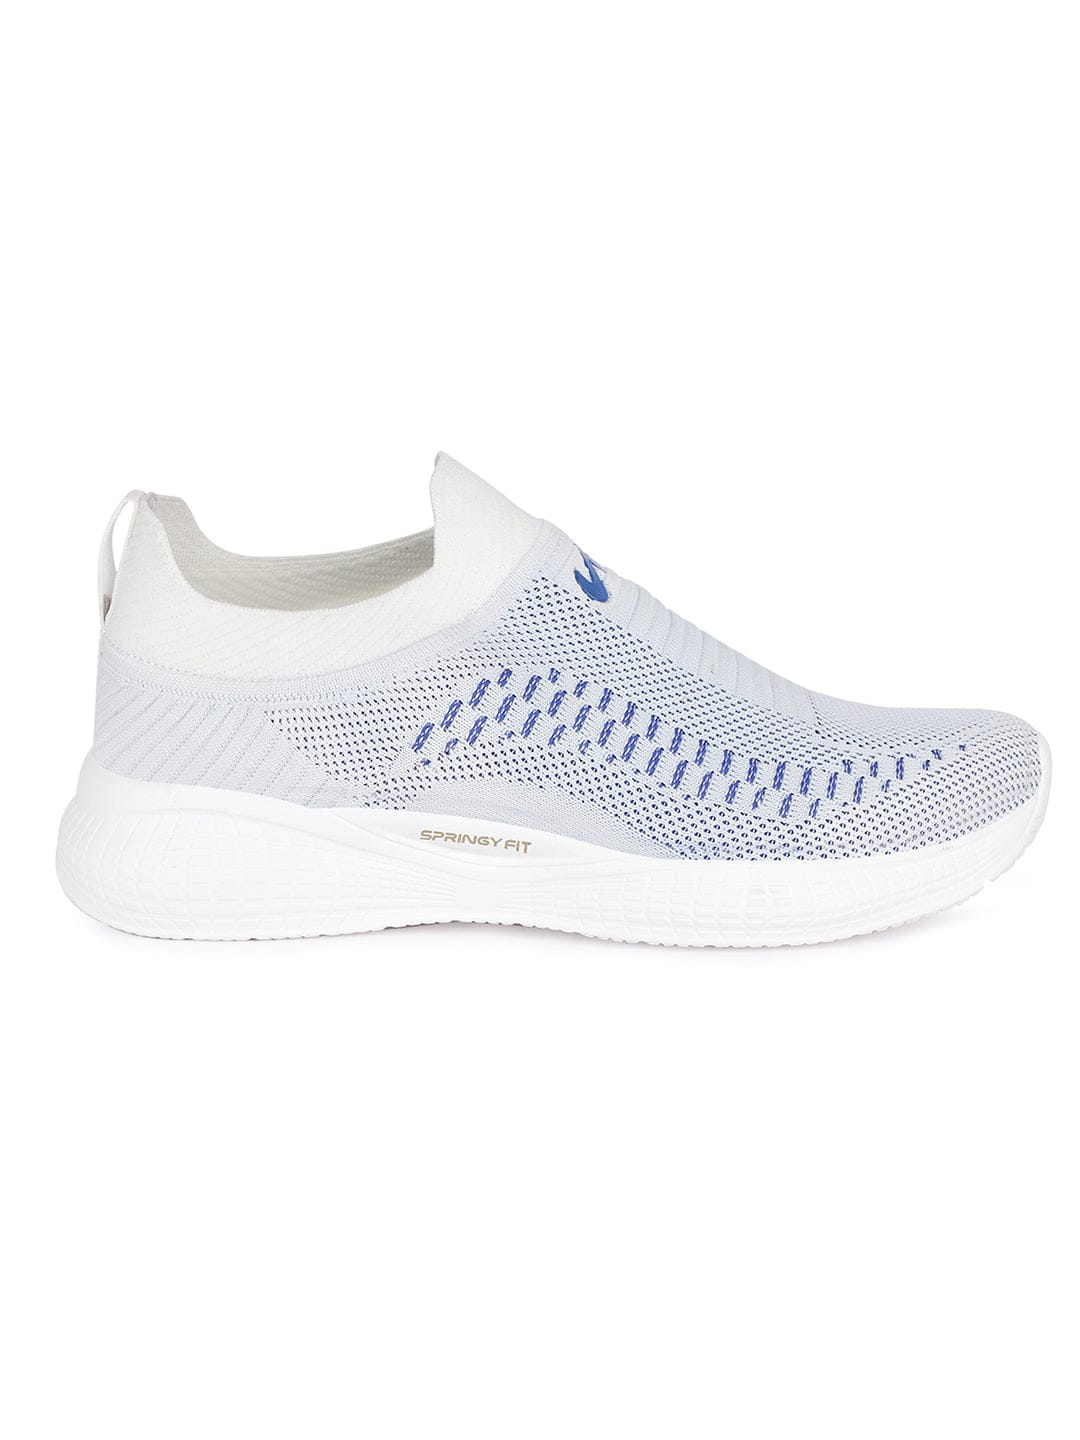 Buy Casual Shoes For Men: Vayuof-Wht-R-Blu | Campus Shoes